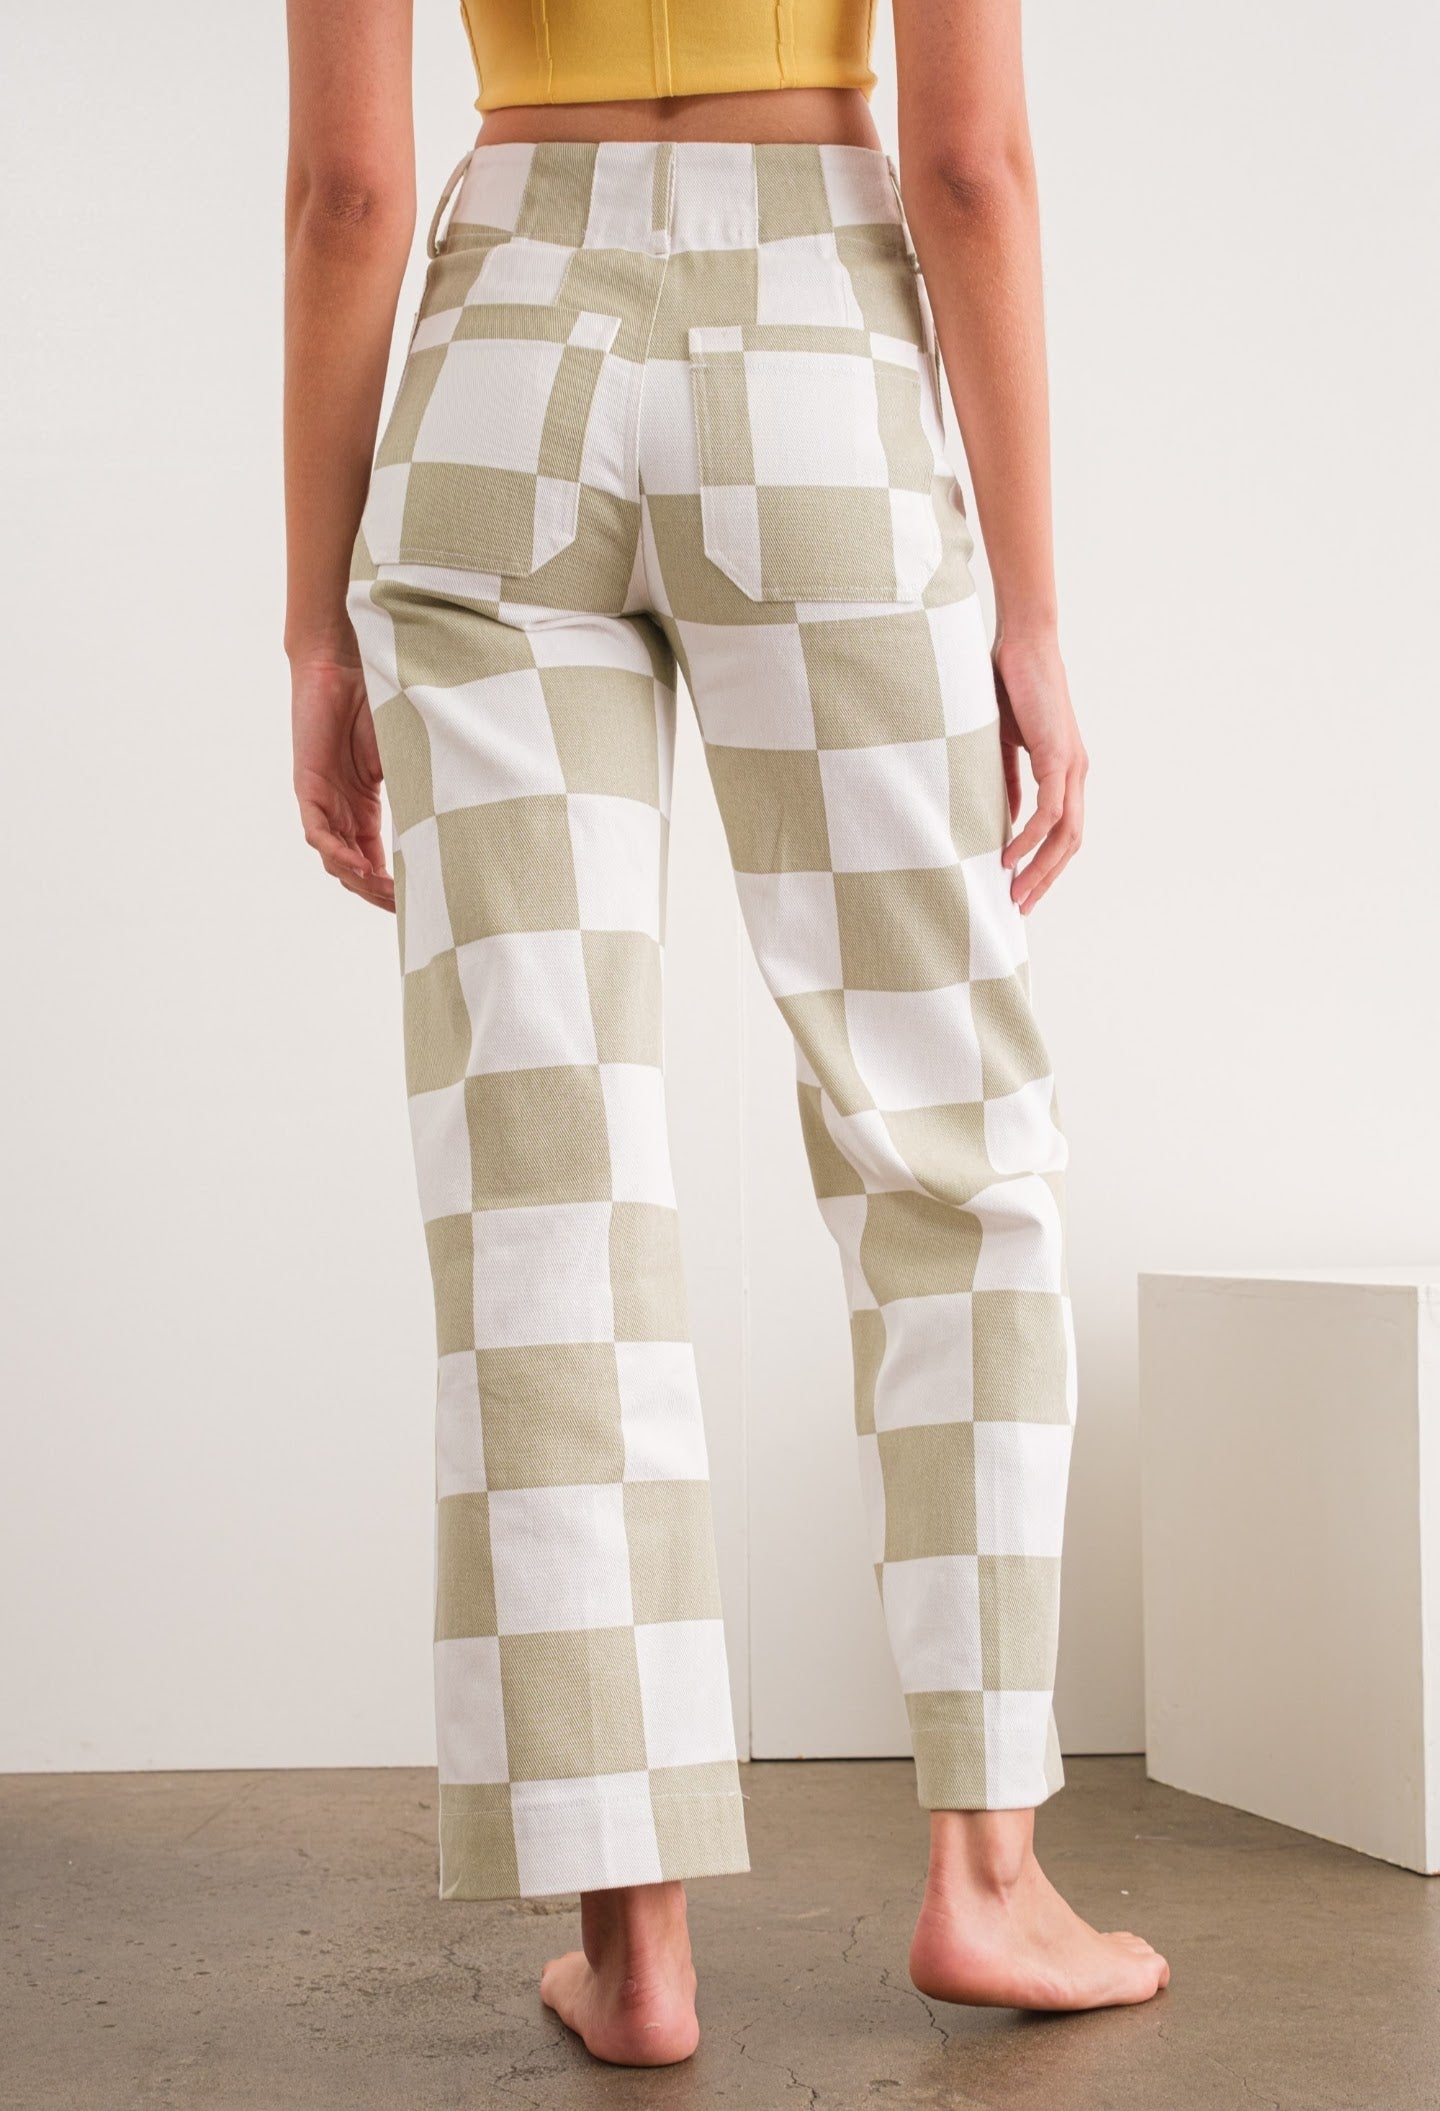 The Anansi Checkered Bottoms in Taupe